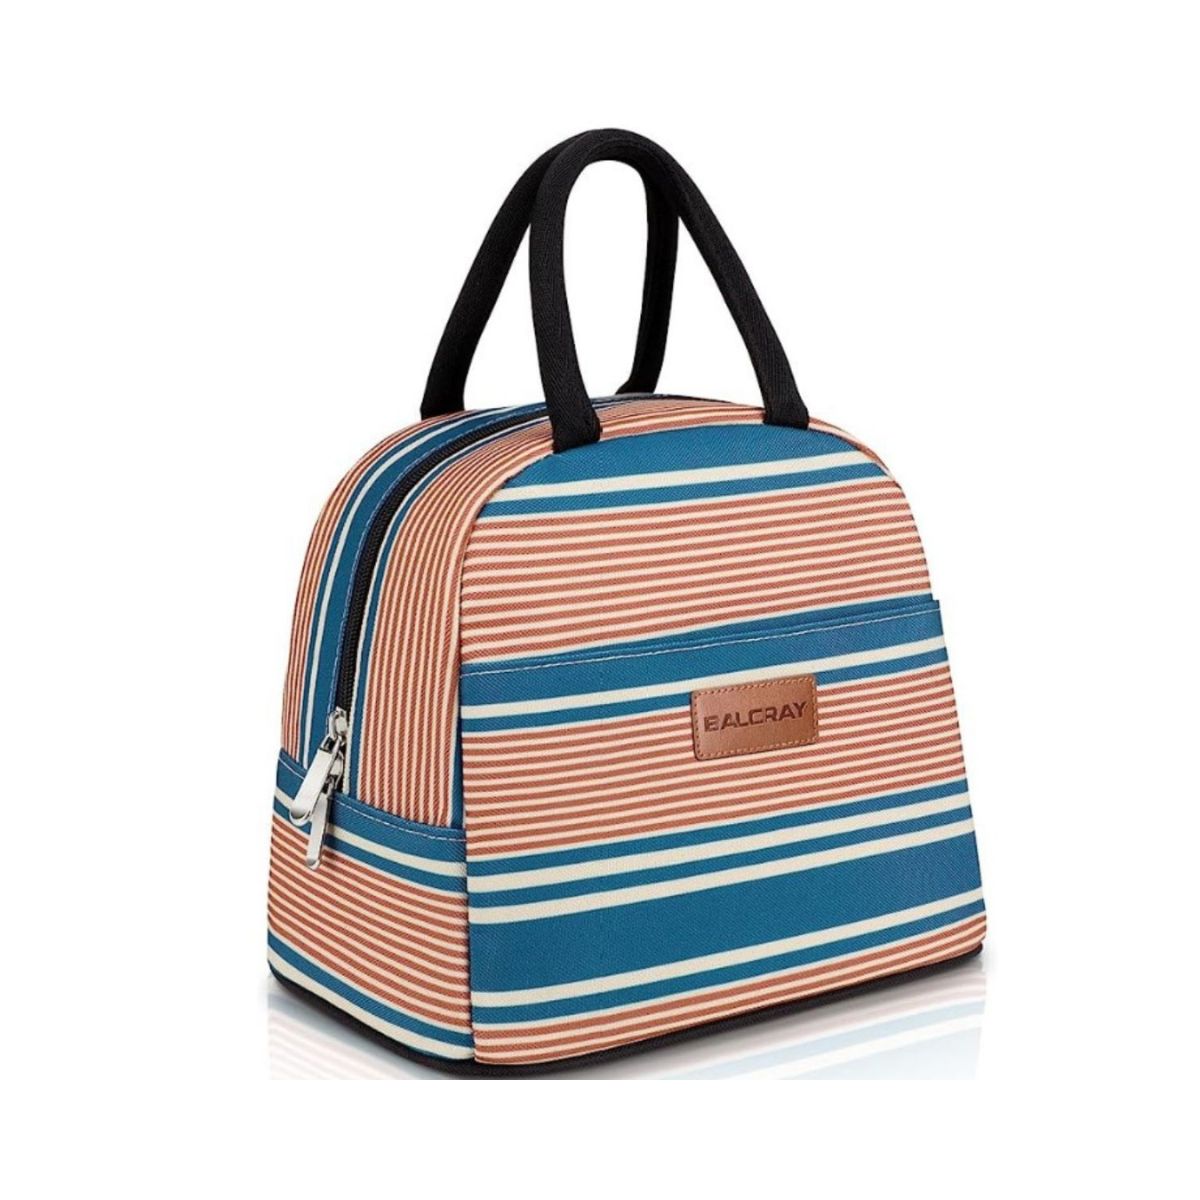 Red, blue and white striped lunchbox